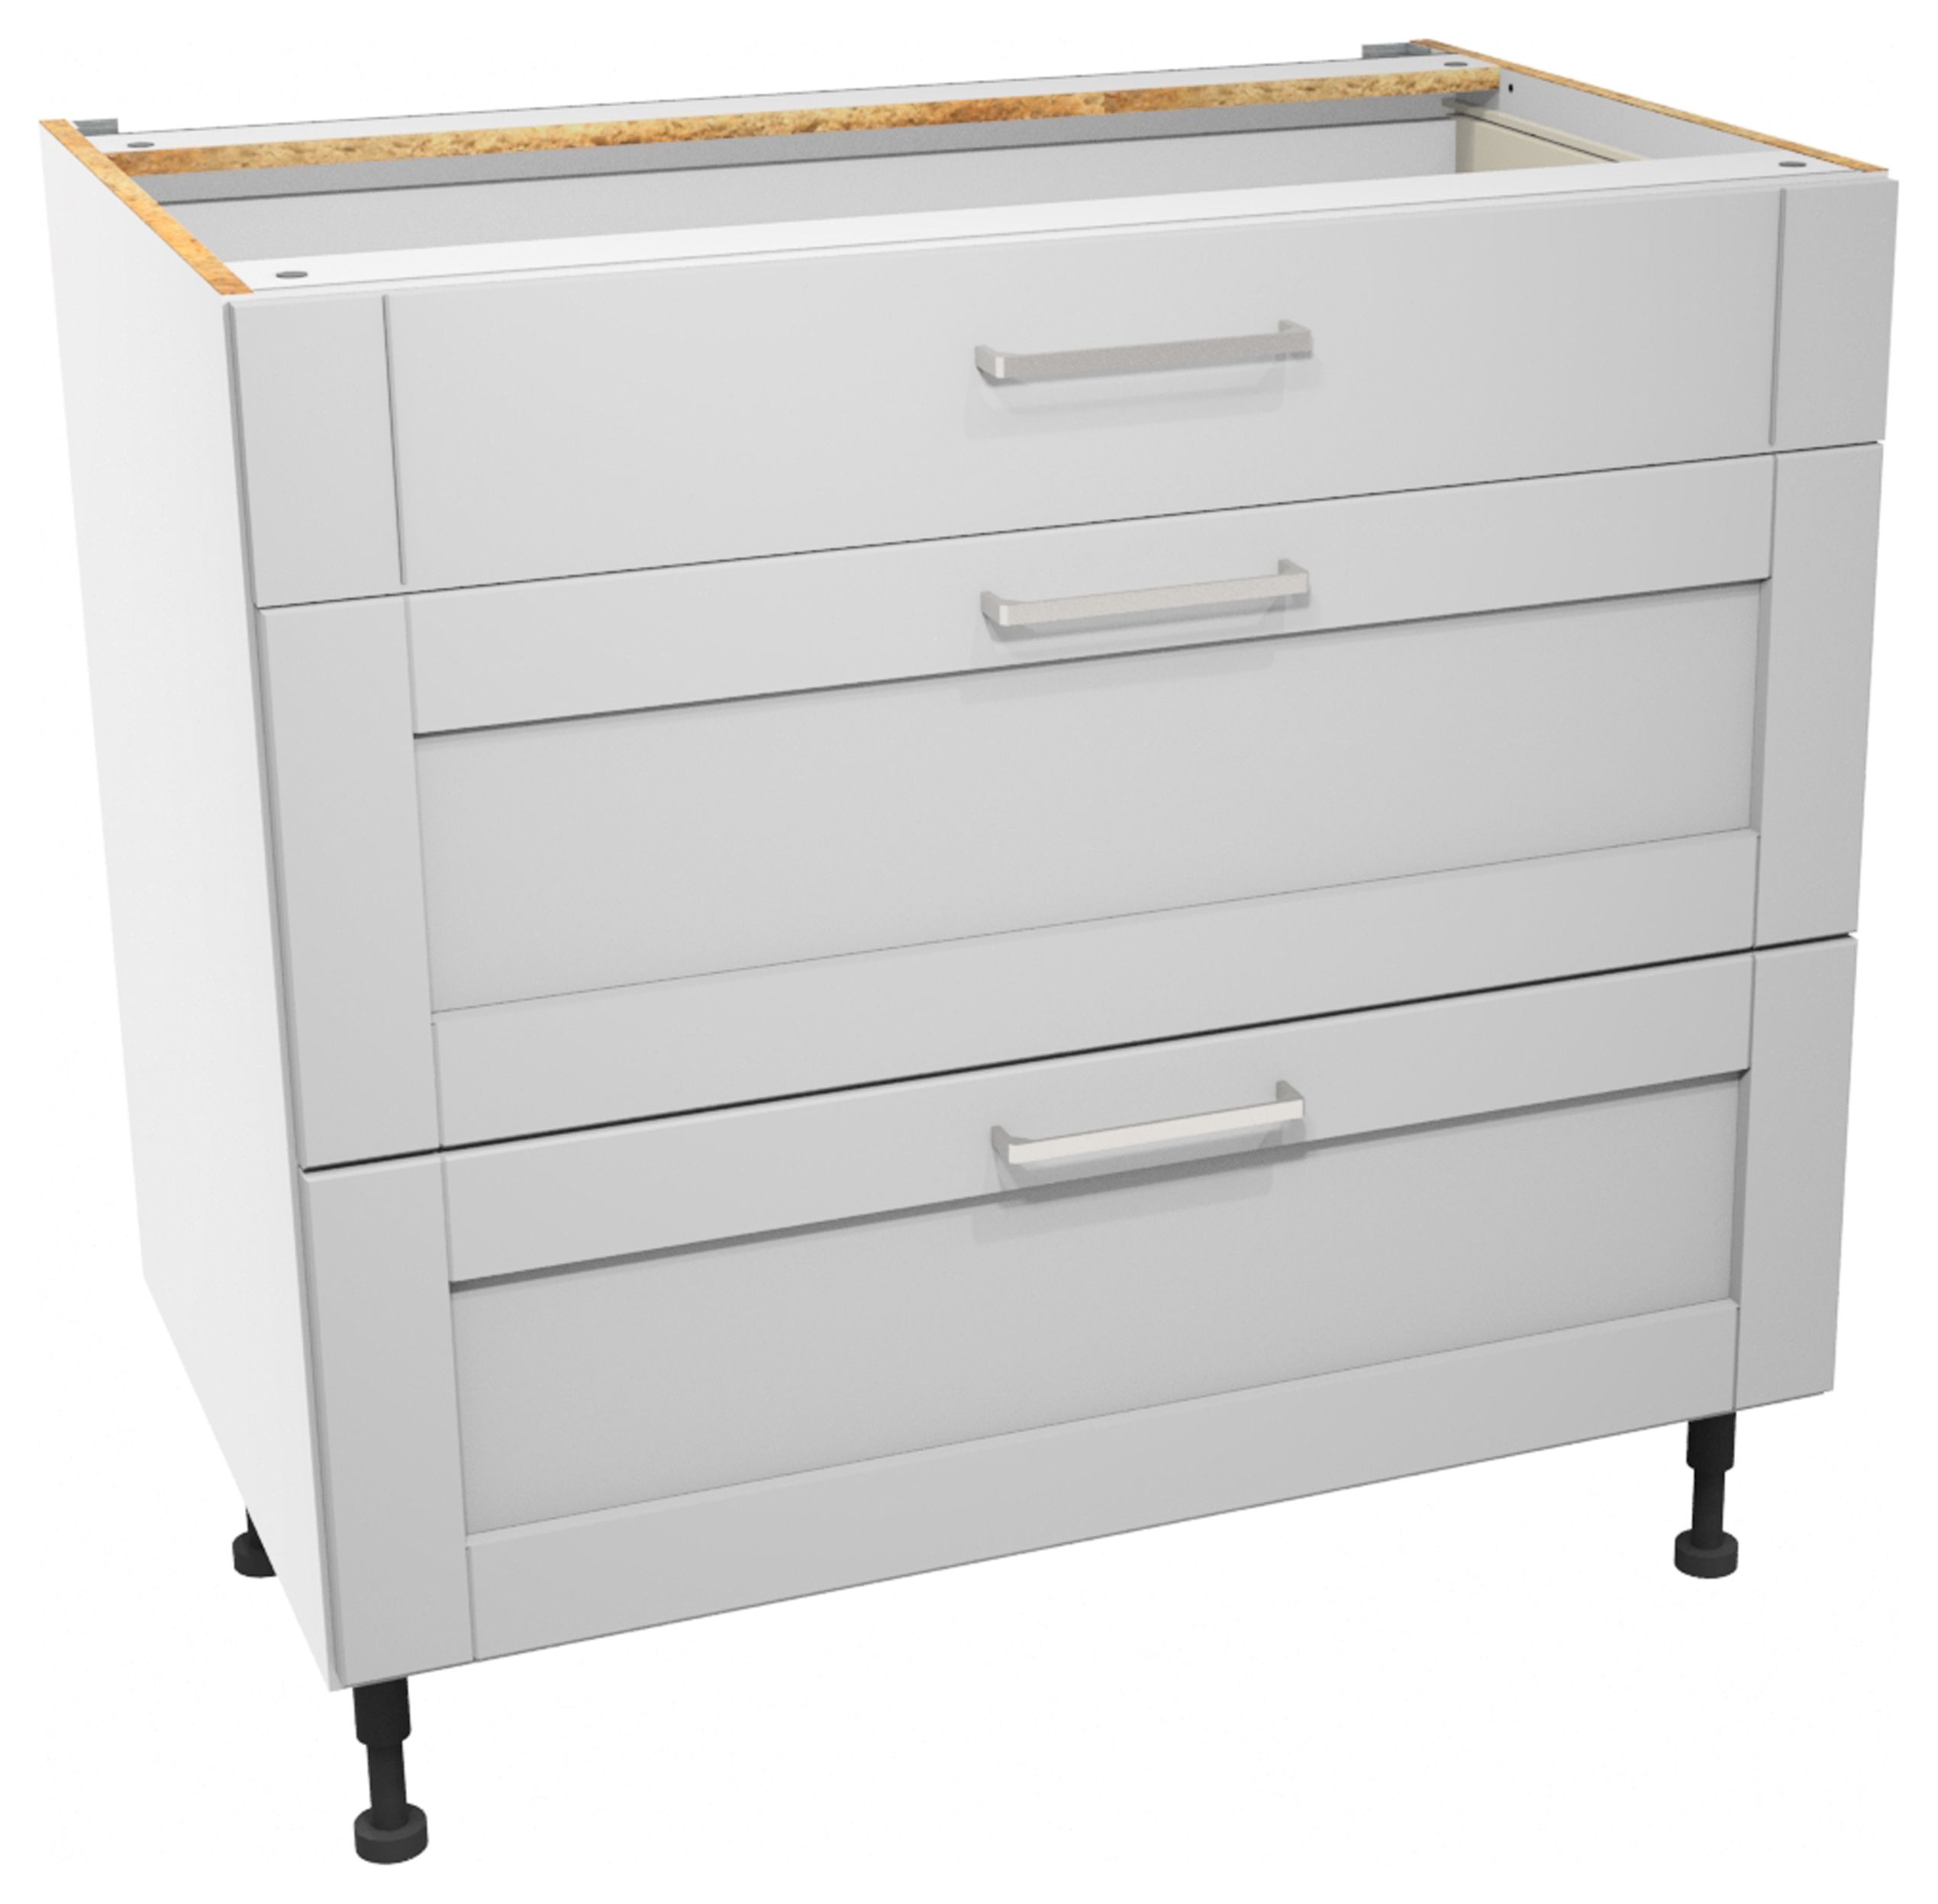 Image of Wickes Ohio Grey Shaker Drawer Unit - 900mm (Part 1 of 2)